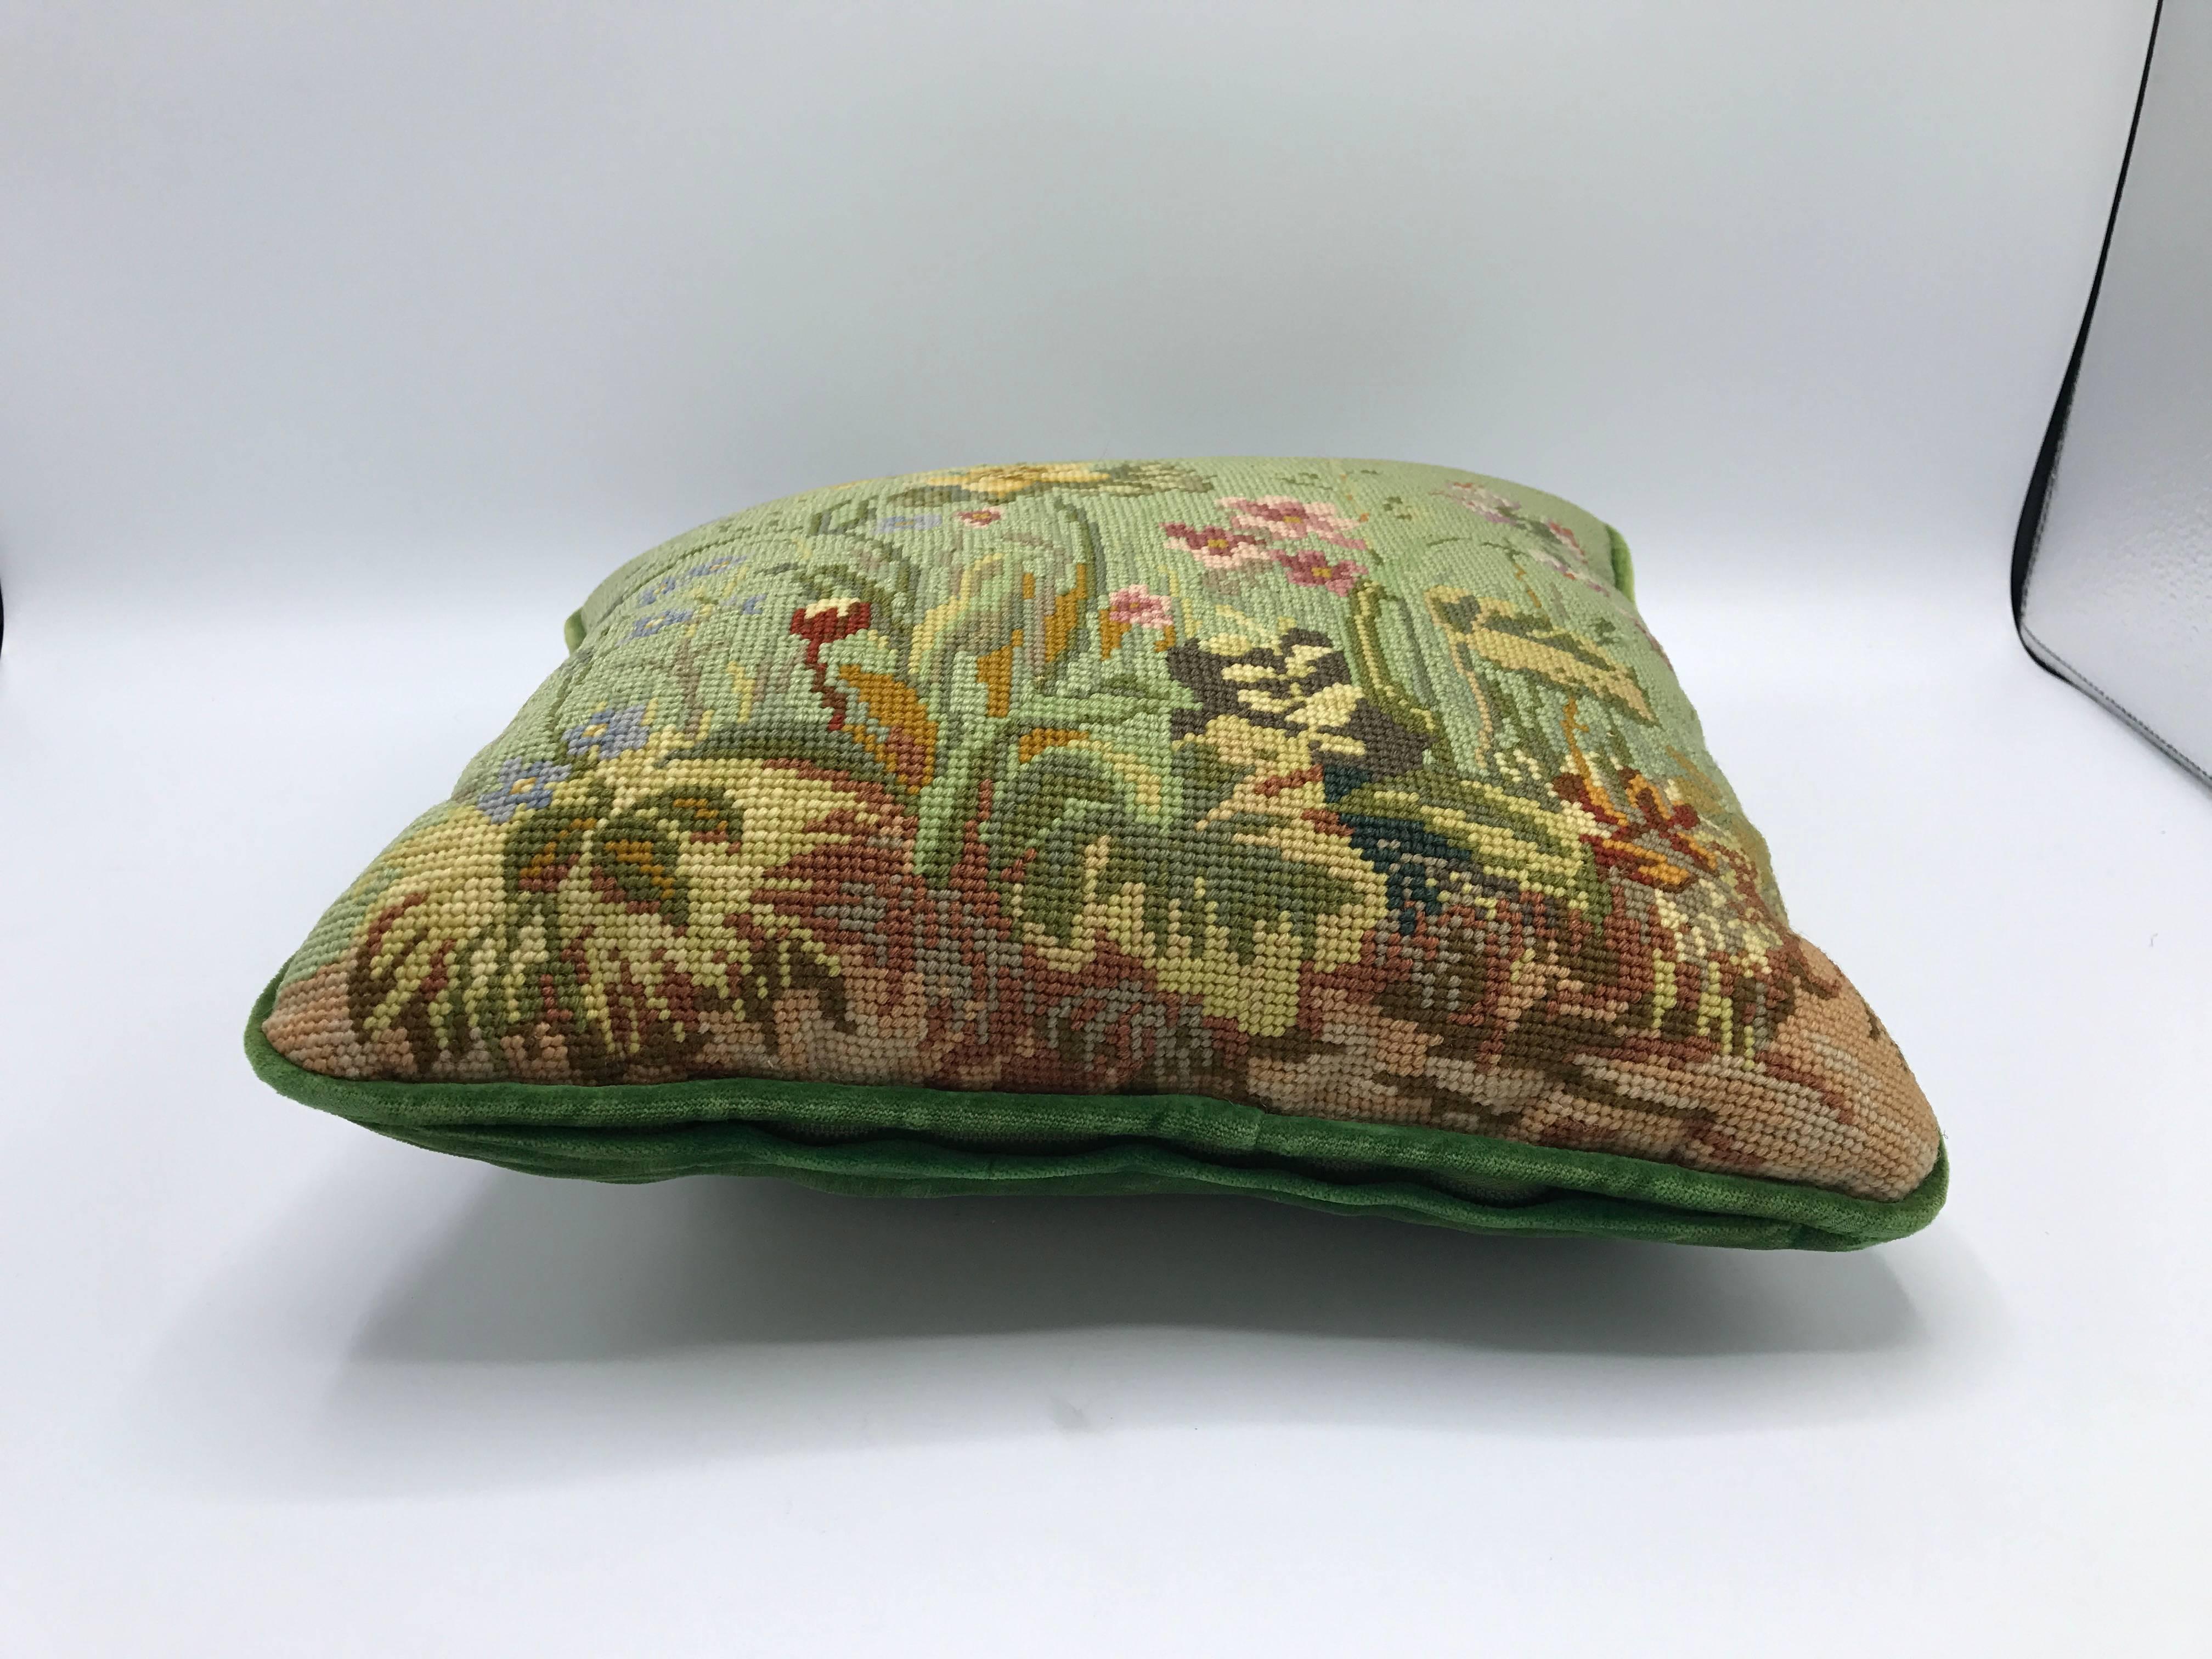 20th Century 1950s Green Needlepoint Pillow with Floral Motif